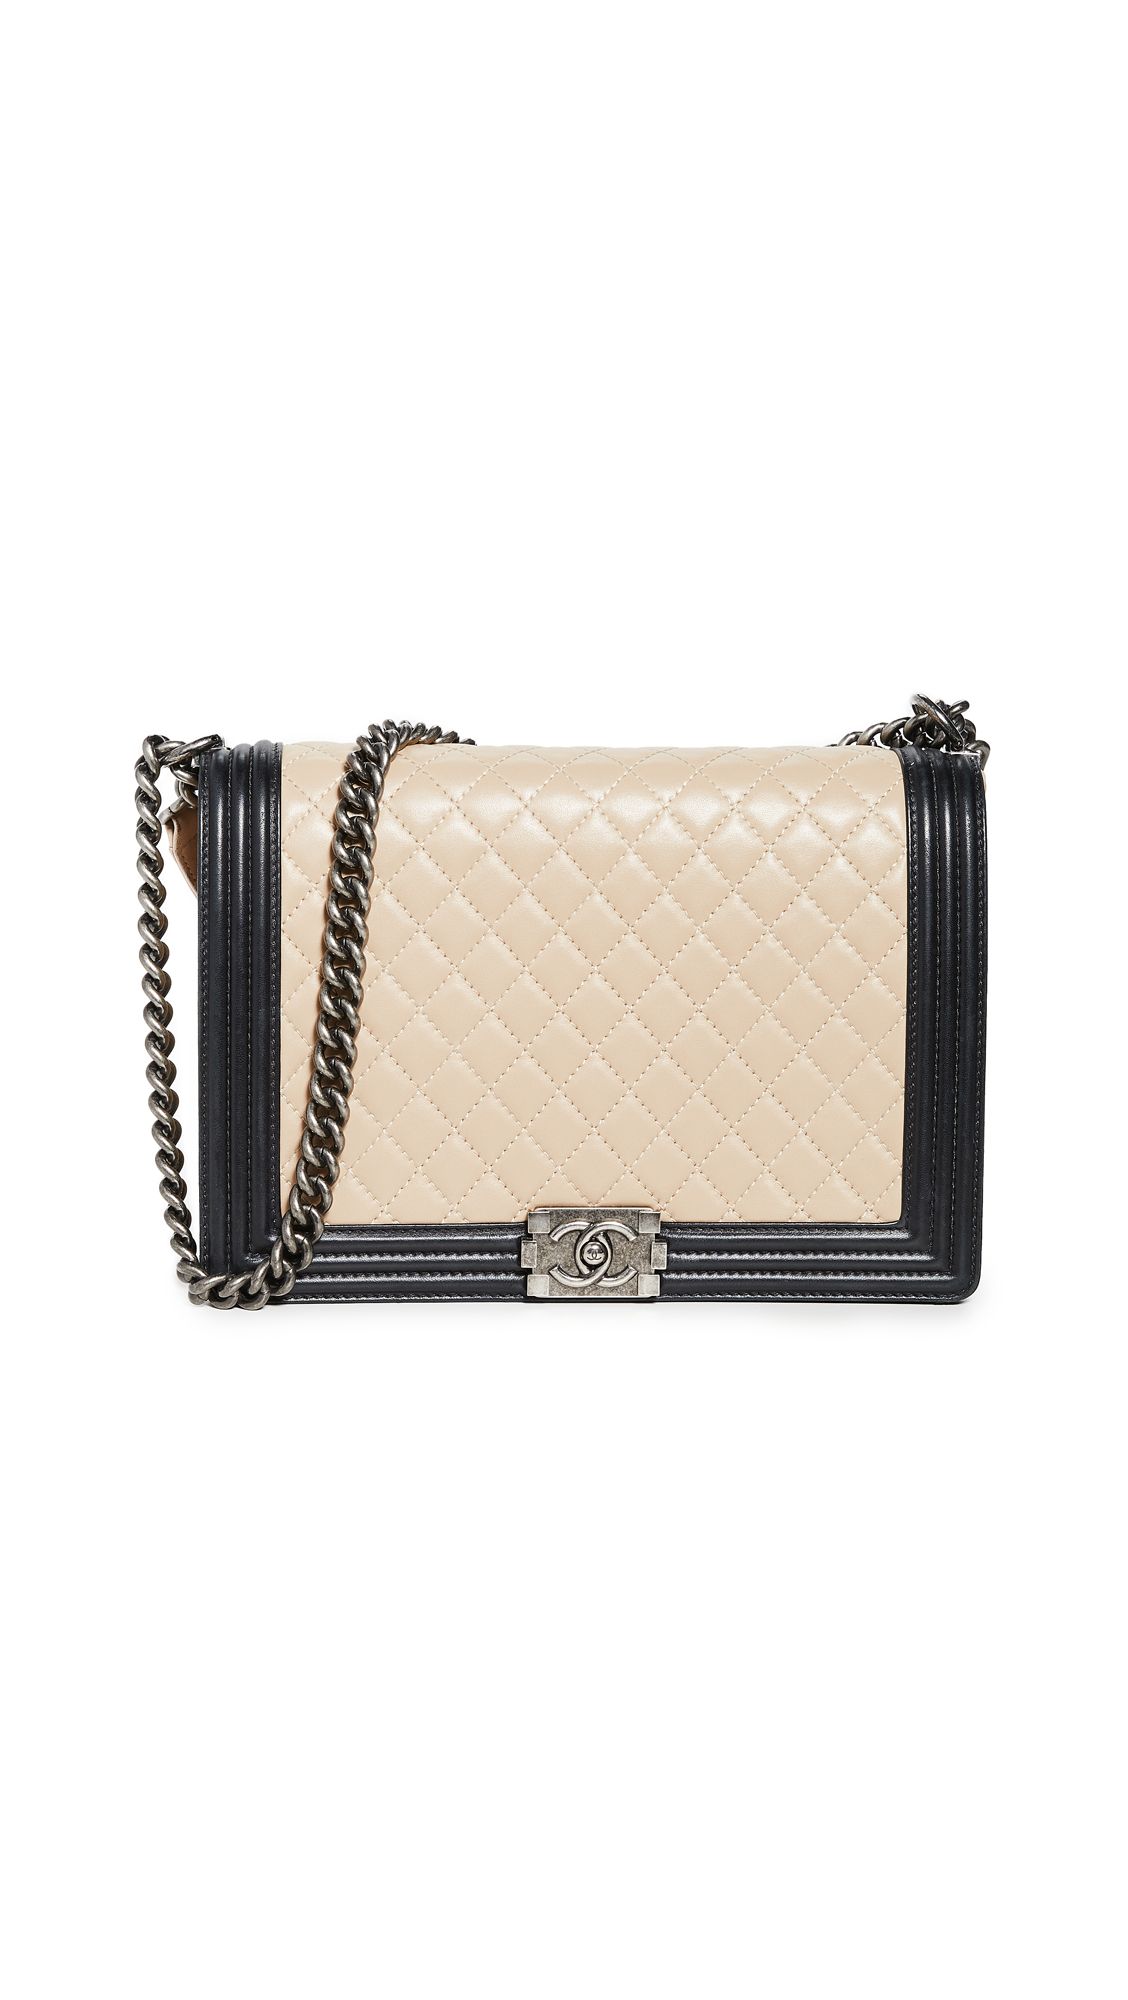 What Goes Around Comes Around Chanel Large Boy Bag | Shopbop